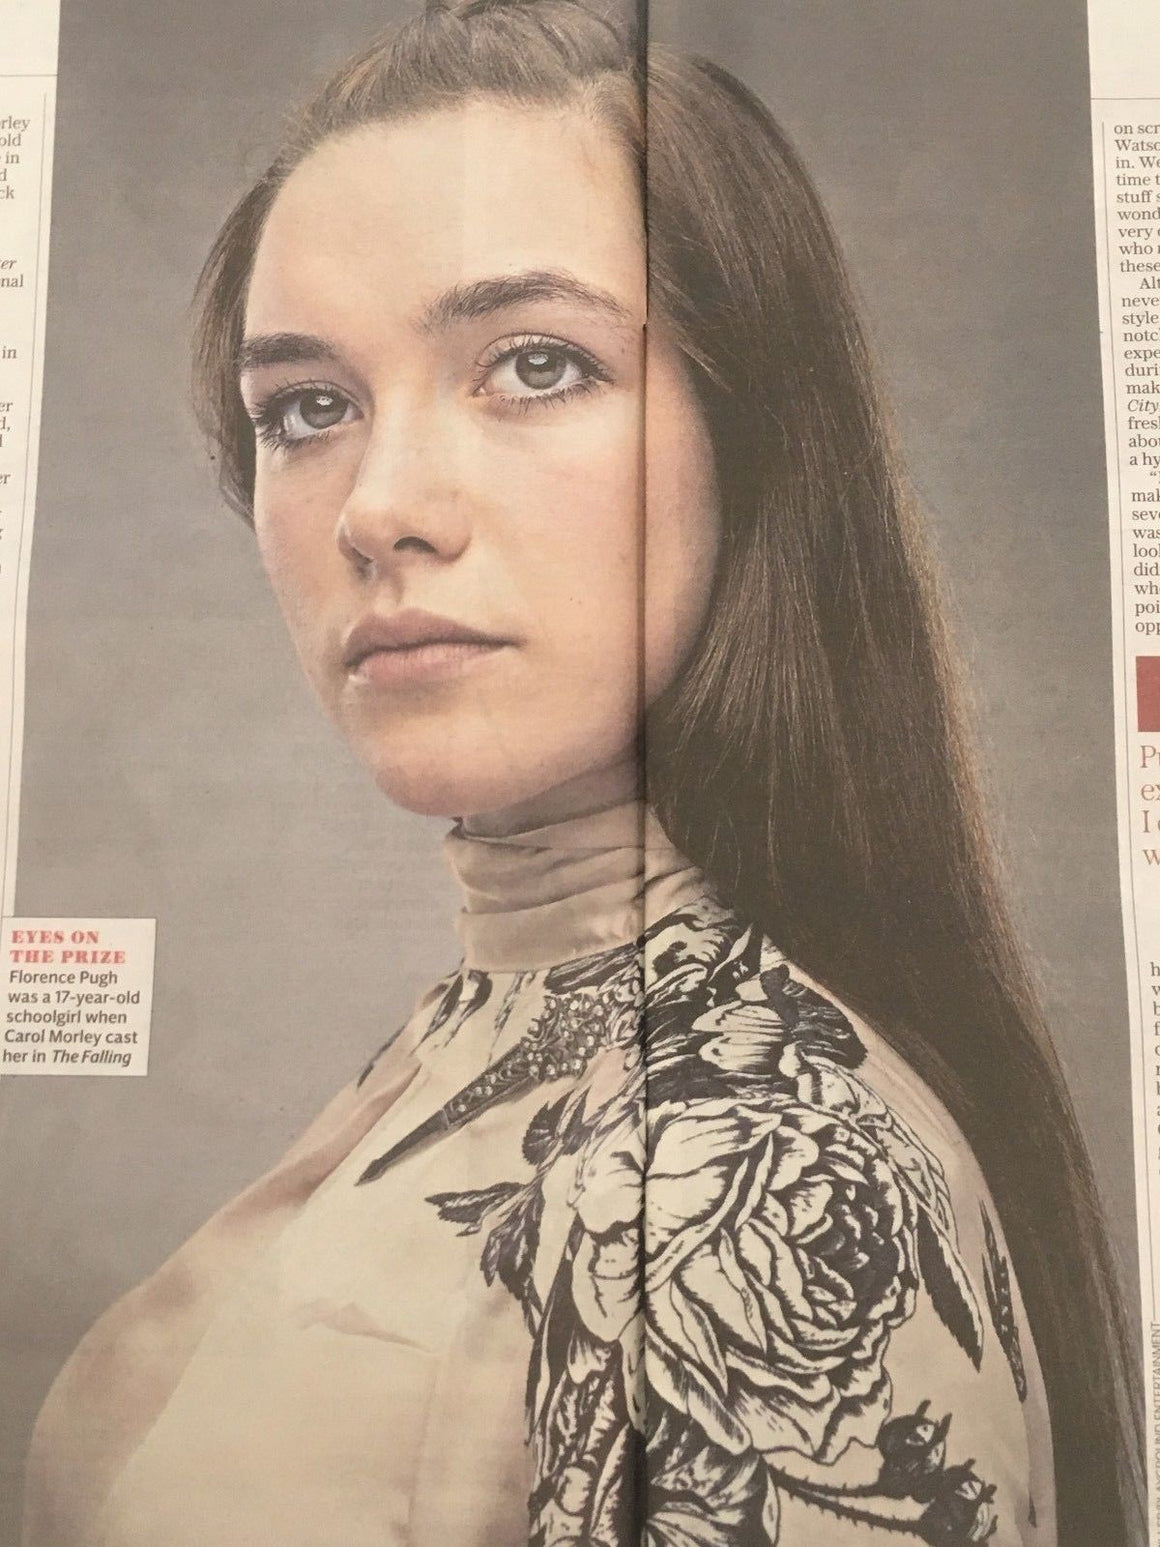 Telegraph Review May 2018 SOLO A Stars Wars Story Alden Ehrenreich Florence Pugh